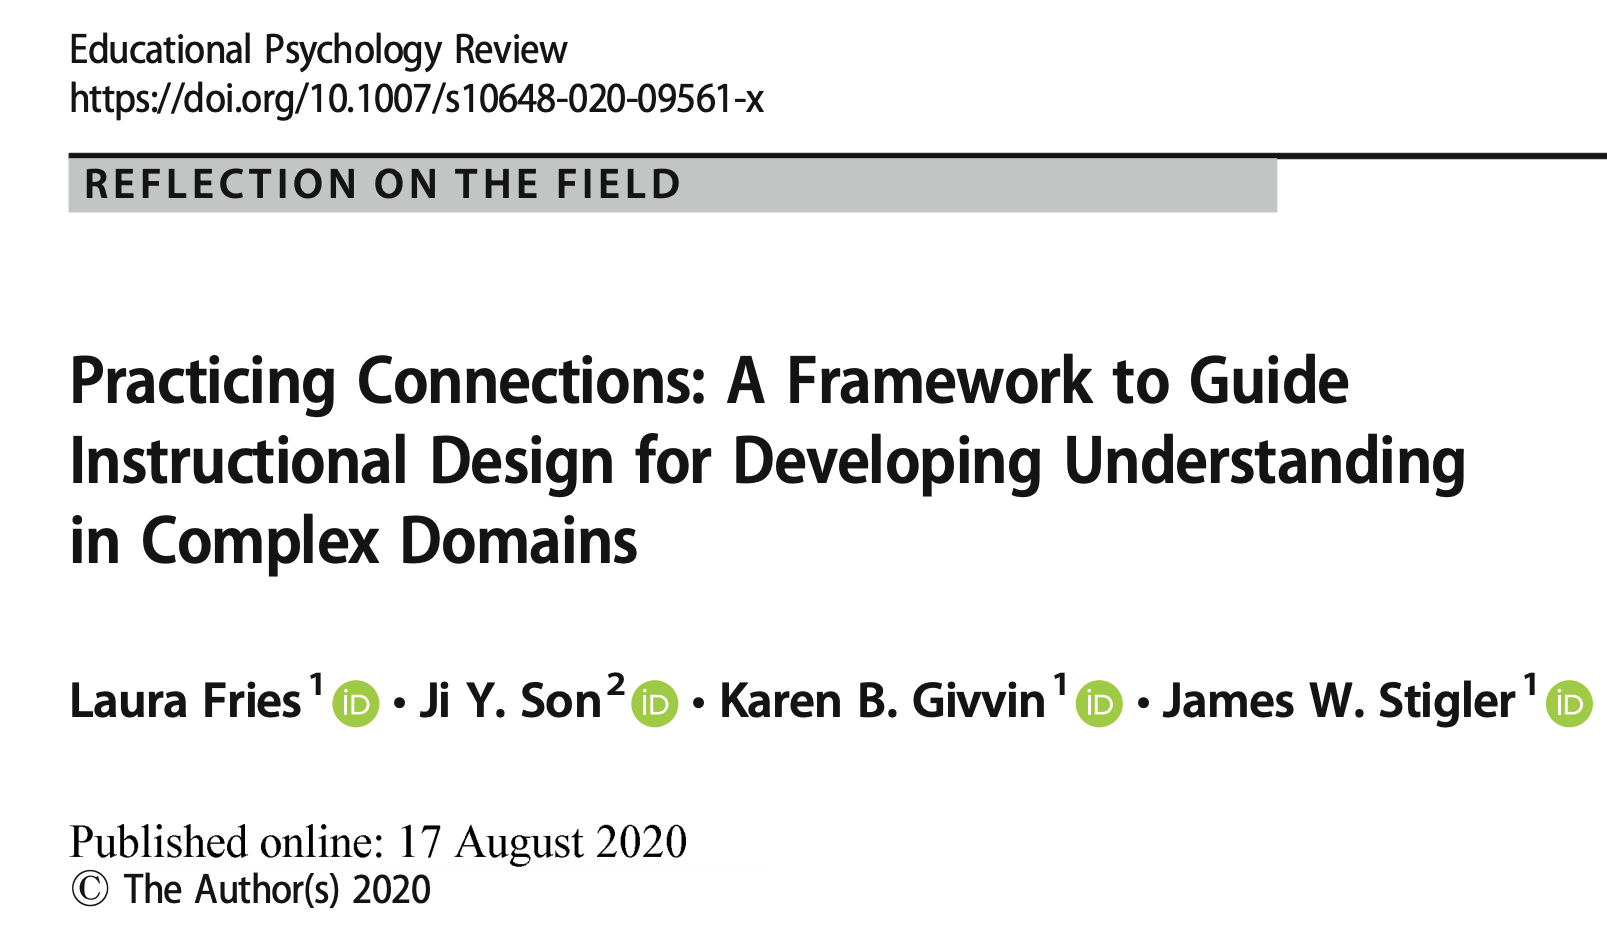 Practicing Connections: A Framework to Guide Instructional Design for Developing Understanding in Complex Domains